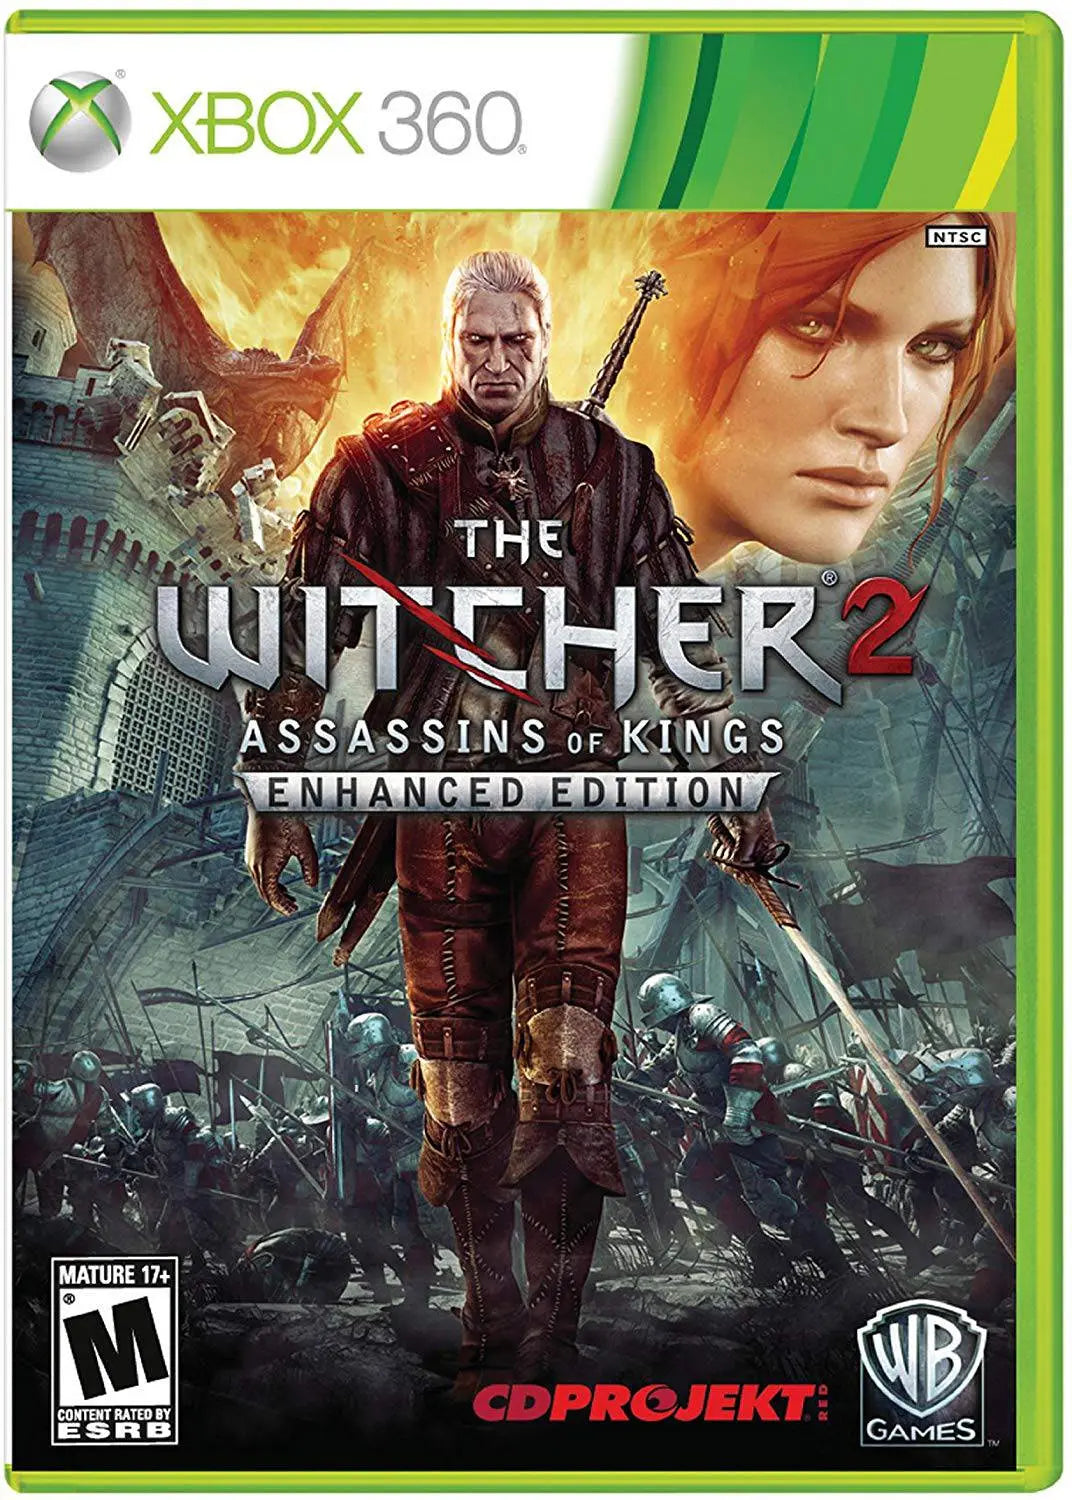 The Witcher 2 Assassins Of Kings  Enhanced Edition Xbox 360 - USED COPY King Gaming